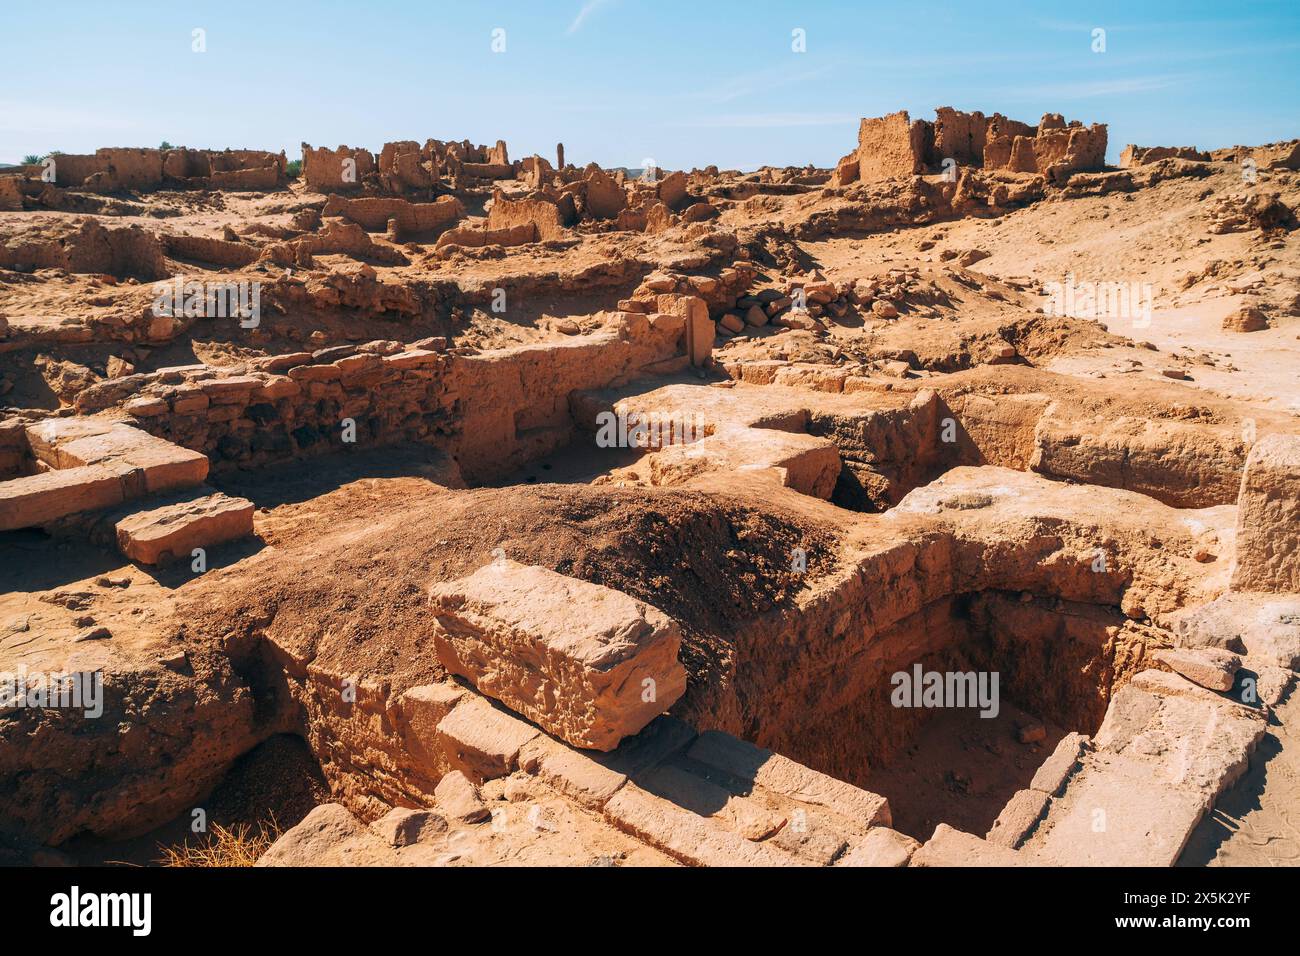 Ruins of the ancient village of Germa, capital of the Garamantes empire, in the Fezzan region, Libya, North Africa, Africa Copyright: LucaxAbbate 1351 Stock Photo